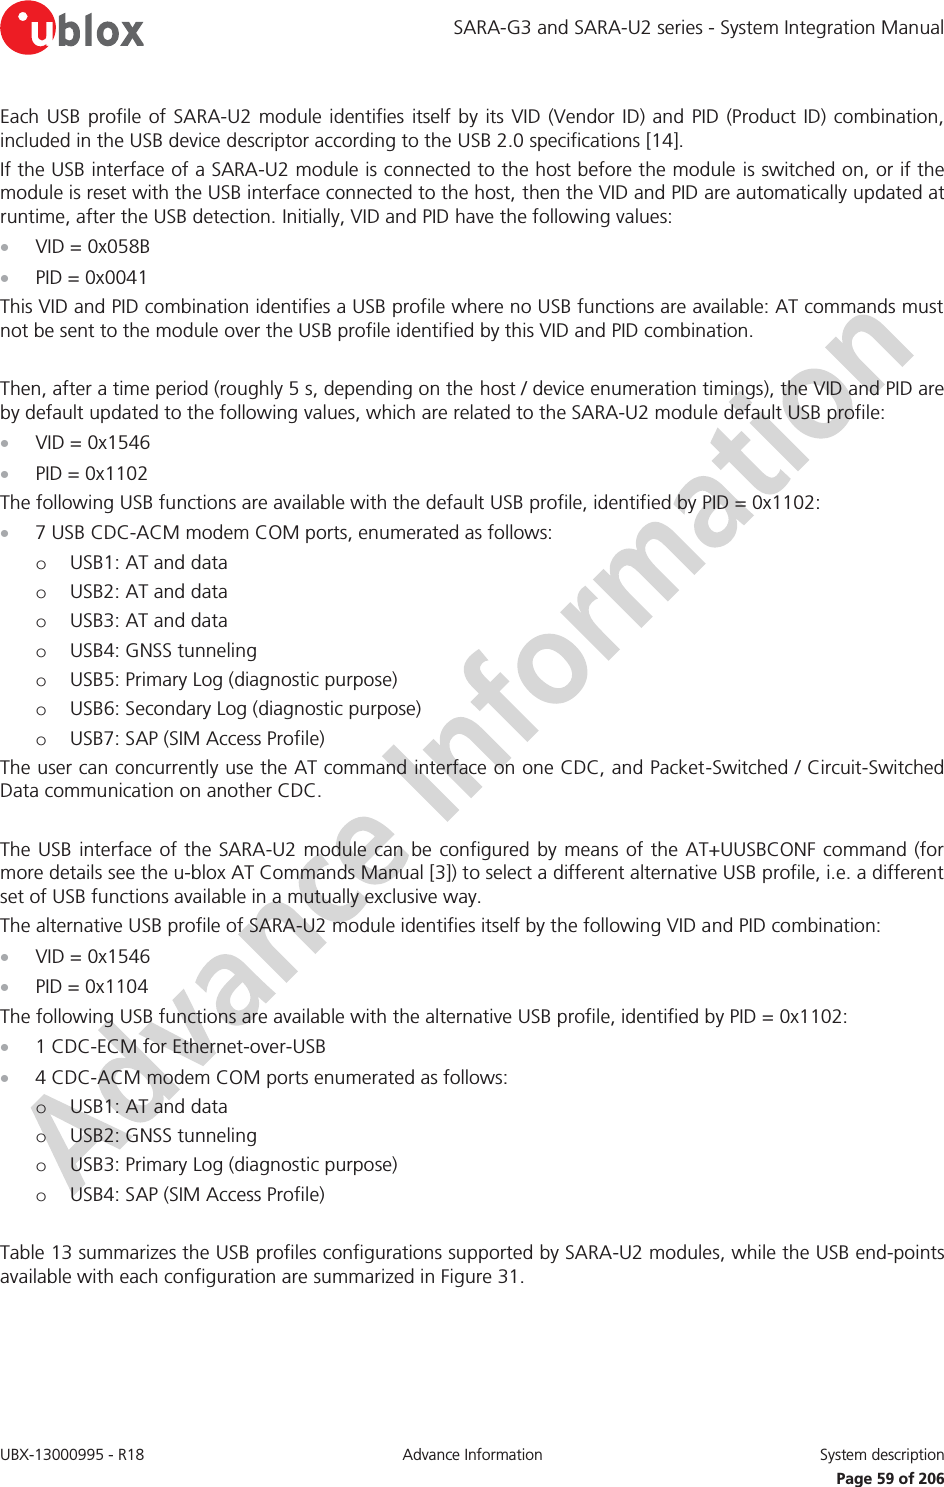 SARA-G3 and SARA-U2 series - System Integration Manual UBX-13000995 - R18  Advance Information  System description   Page 59 of 206 Each USB profile of SARA-U2 module identifies itself by its VID (Vendor ID) and PID (Product ID) combination, included in the USB device descriptor according to the USB 2.0 specifications [14]. If the USB interface of a SARA-U2 module is connected to the host before the module is switched on, or if the module is reset with the USB interface connected to the host, then the VID and PID are automatically updated at runtime, after the USB detection. Initially, VID and PID have the following values: x VID = 0x058B x PID = 0x0041 This VID and PID combination identifies a USB profile where no USB functions are available: AT commands must not be sent to the module over the USB profile identified by this VID and PID combination.  Then, after a time period (roughly 5 s, depending on the host / device enumeration timings), the VID and PID are by default updated to the following values, which are related to the SARA-U2 module default USB profile: x VID = 0x1546 x PID = 0x1102 The following USB functions are available with the default USB profile, identified by PID = 0x1102: x 7 USB CDC-ACM modem COM ports, enumerated as follows: o USB1: AT and data o USB2: AT and data o USB3: AT and data o USB4: GNSS tunneling o USB5: Primary Log (diagnostic purpose) o USB6: Secondary Log (diagnostic purpose) o USB7: SAP (SIM Access Profile) The user can concurrently use the AT command interface on one CDC, and Packet-Switched / Circuit-Switched Data communication on another CDC.  The USB interface of the SARA-U2 module can be configured by means of the AT+UUSBCONF command (for more details see the u-blox AT Commands Manual [3]) to select a different alternative USB profile, i.e. a different set of USB functions available in a mutually exclusive way. The alternative USB profile of SARA-U2 module identifies itself by the following VID and PID combination: x VID = 0x1546 x PID = 0x1104 The following USB functions are available with the alternative USB profile, identified by PID = 0x1102: x 1 CDC-ECM for Ethernet-over-USB  x 4 CDC-ACM modem COM ports enumerated as follows: o USB1: AT and data o USB2: GNSS tunneling o USB3: Primary Log (diagnostic purpose) o USB4: SAP (SIM Access Profile)  Table 13 summarizes the USB profiles configurations supported by SARA-U2 modules, while the USB end-points available with each configuration are summarized in Figure 31.  